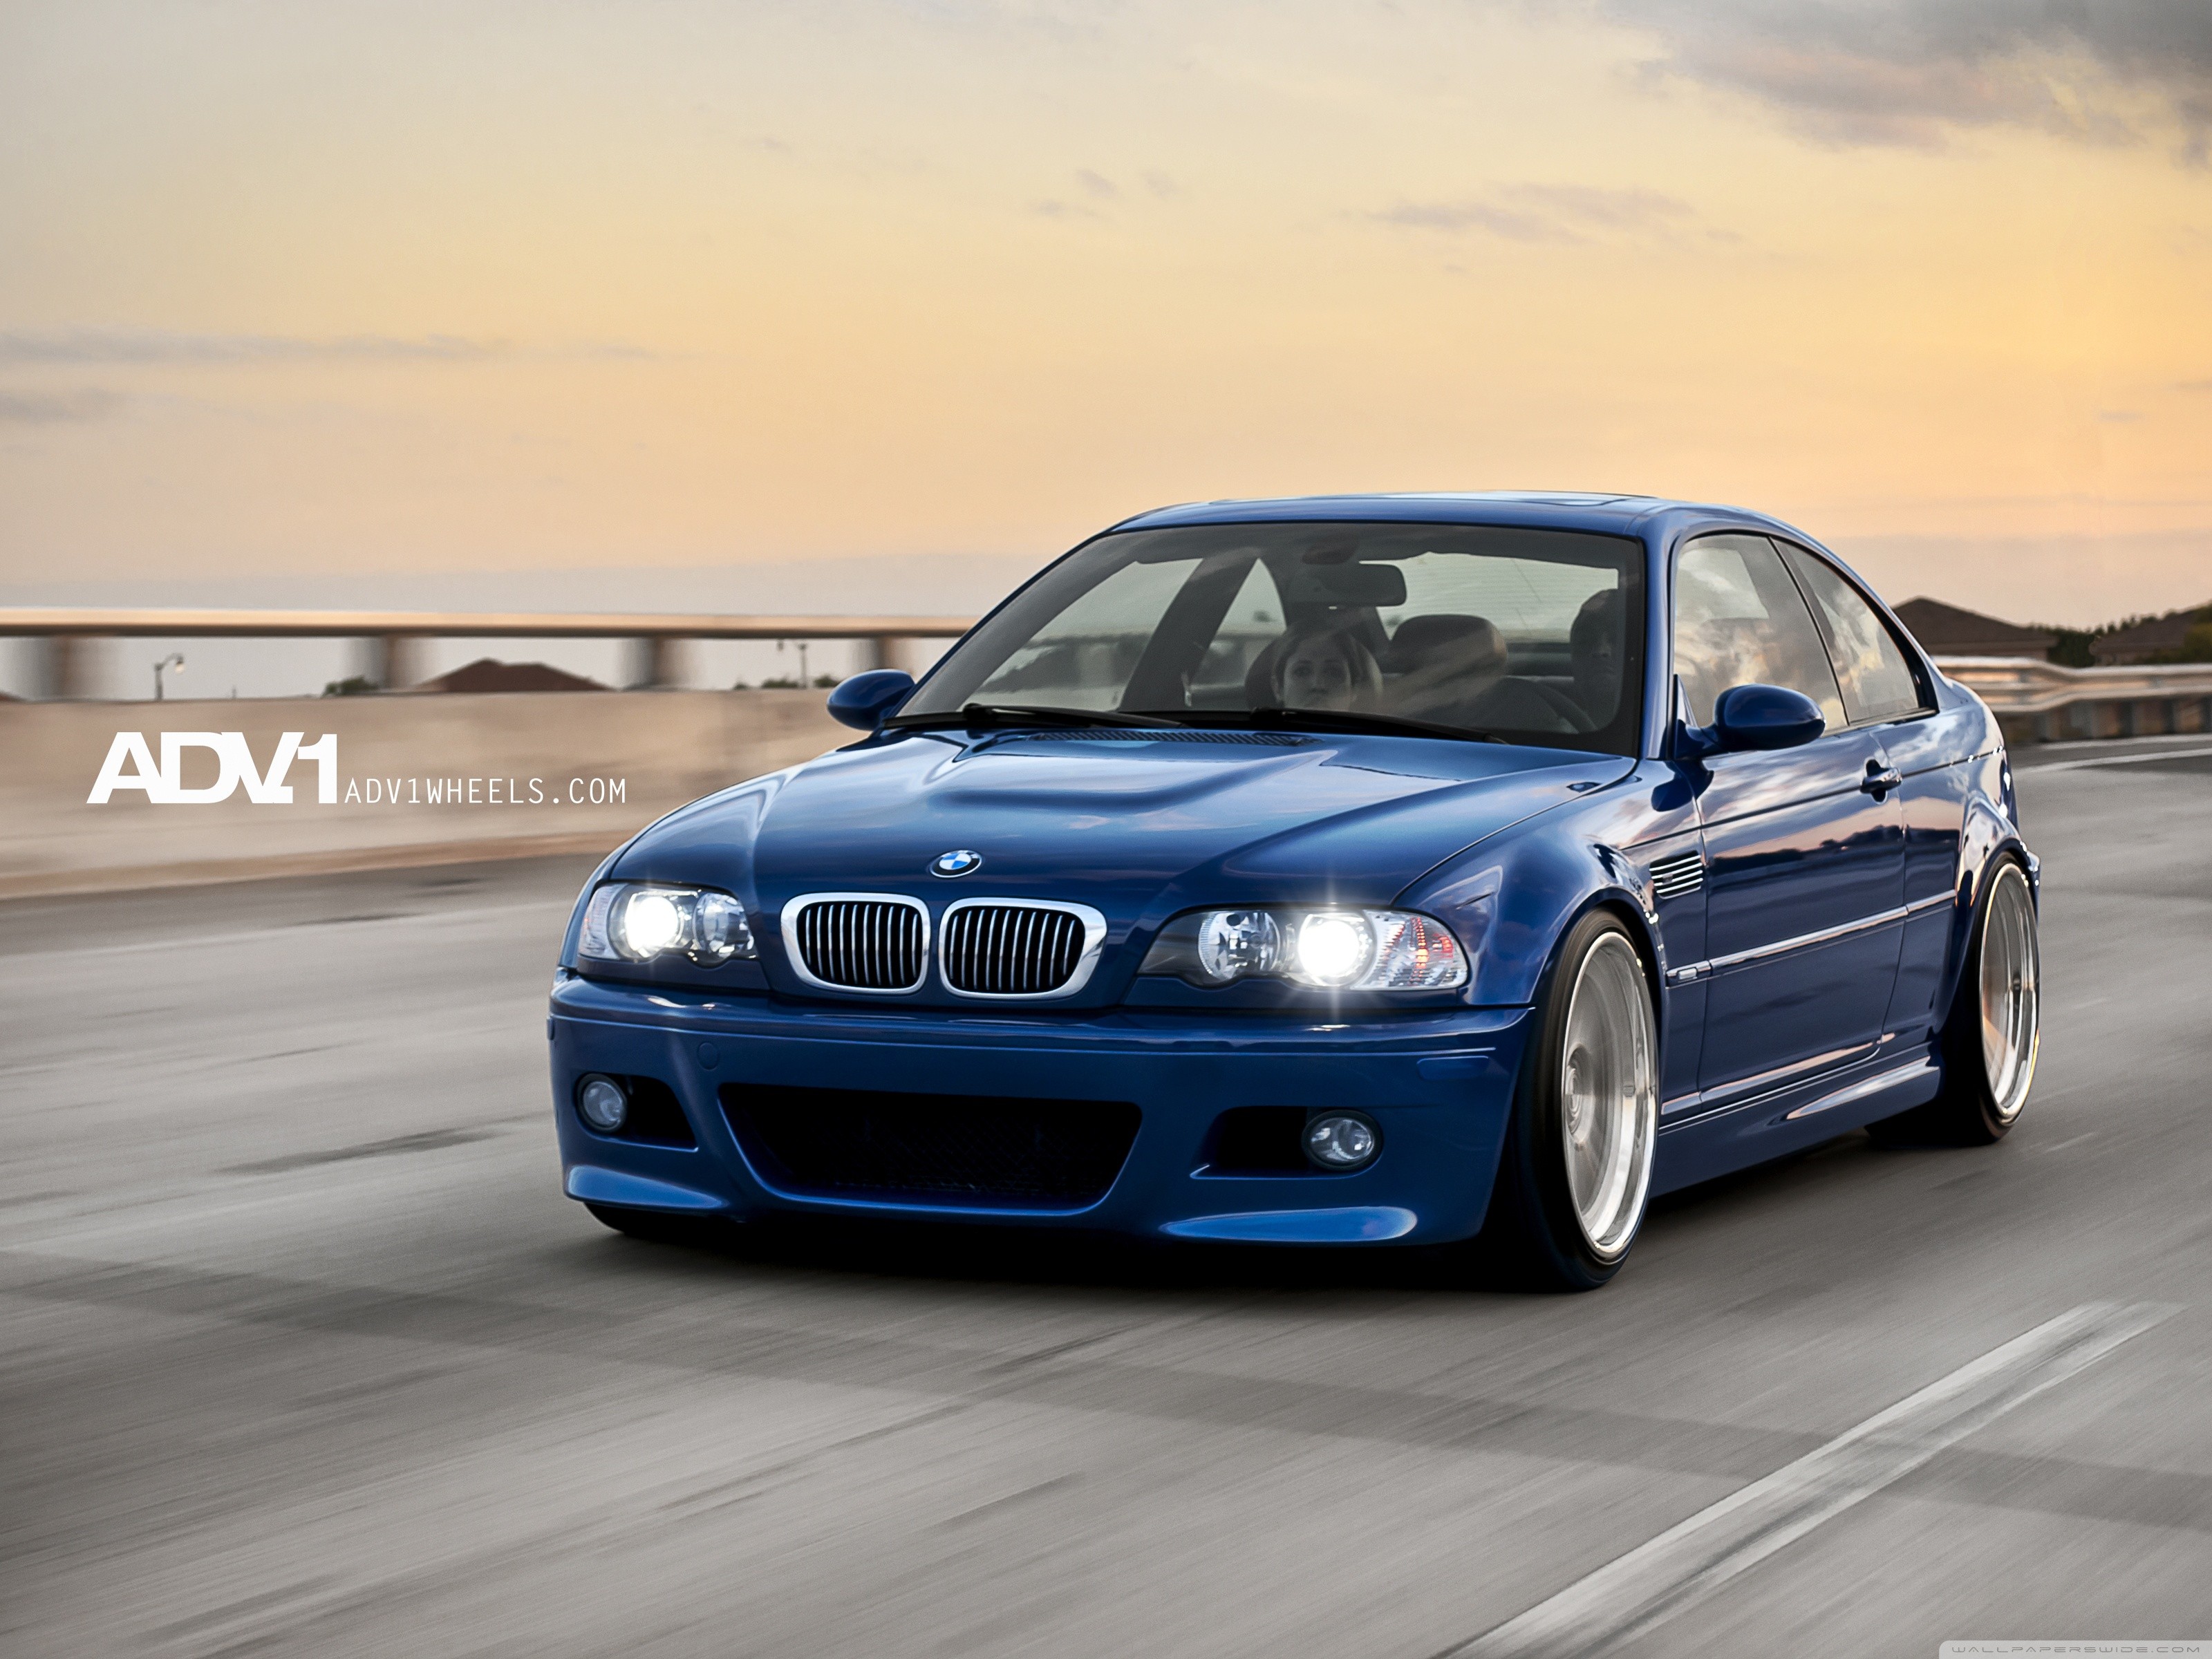 Wallpaper car BMW vehicle free pictures on Fonwall